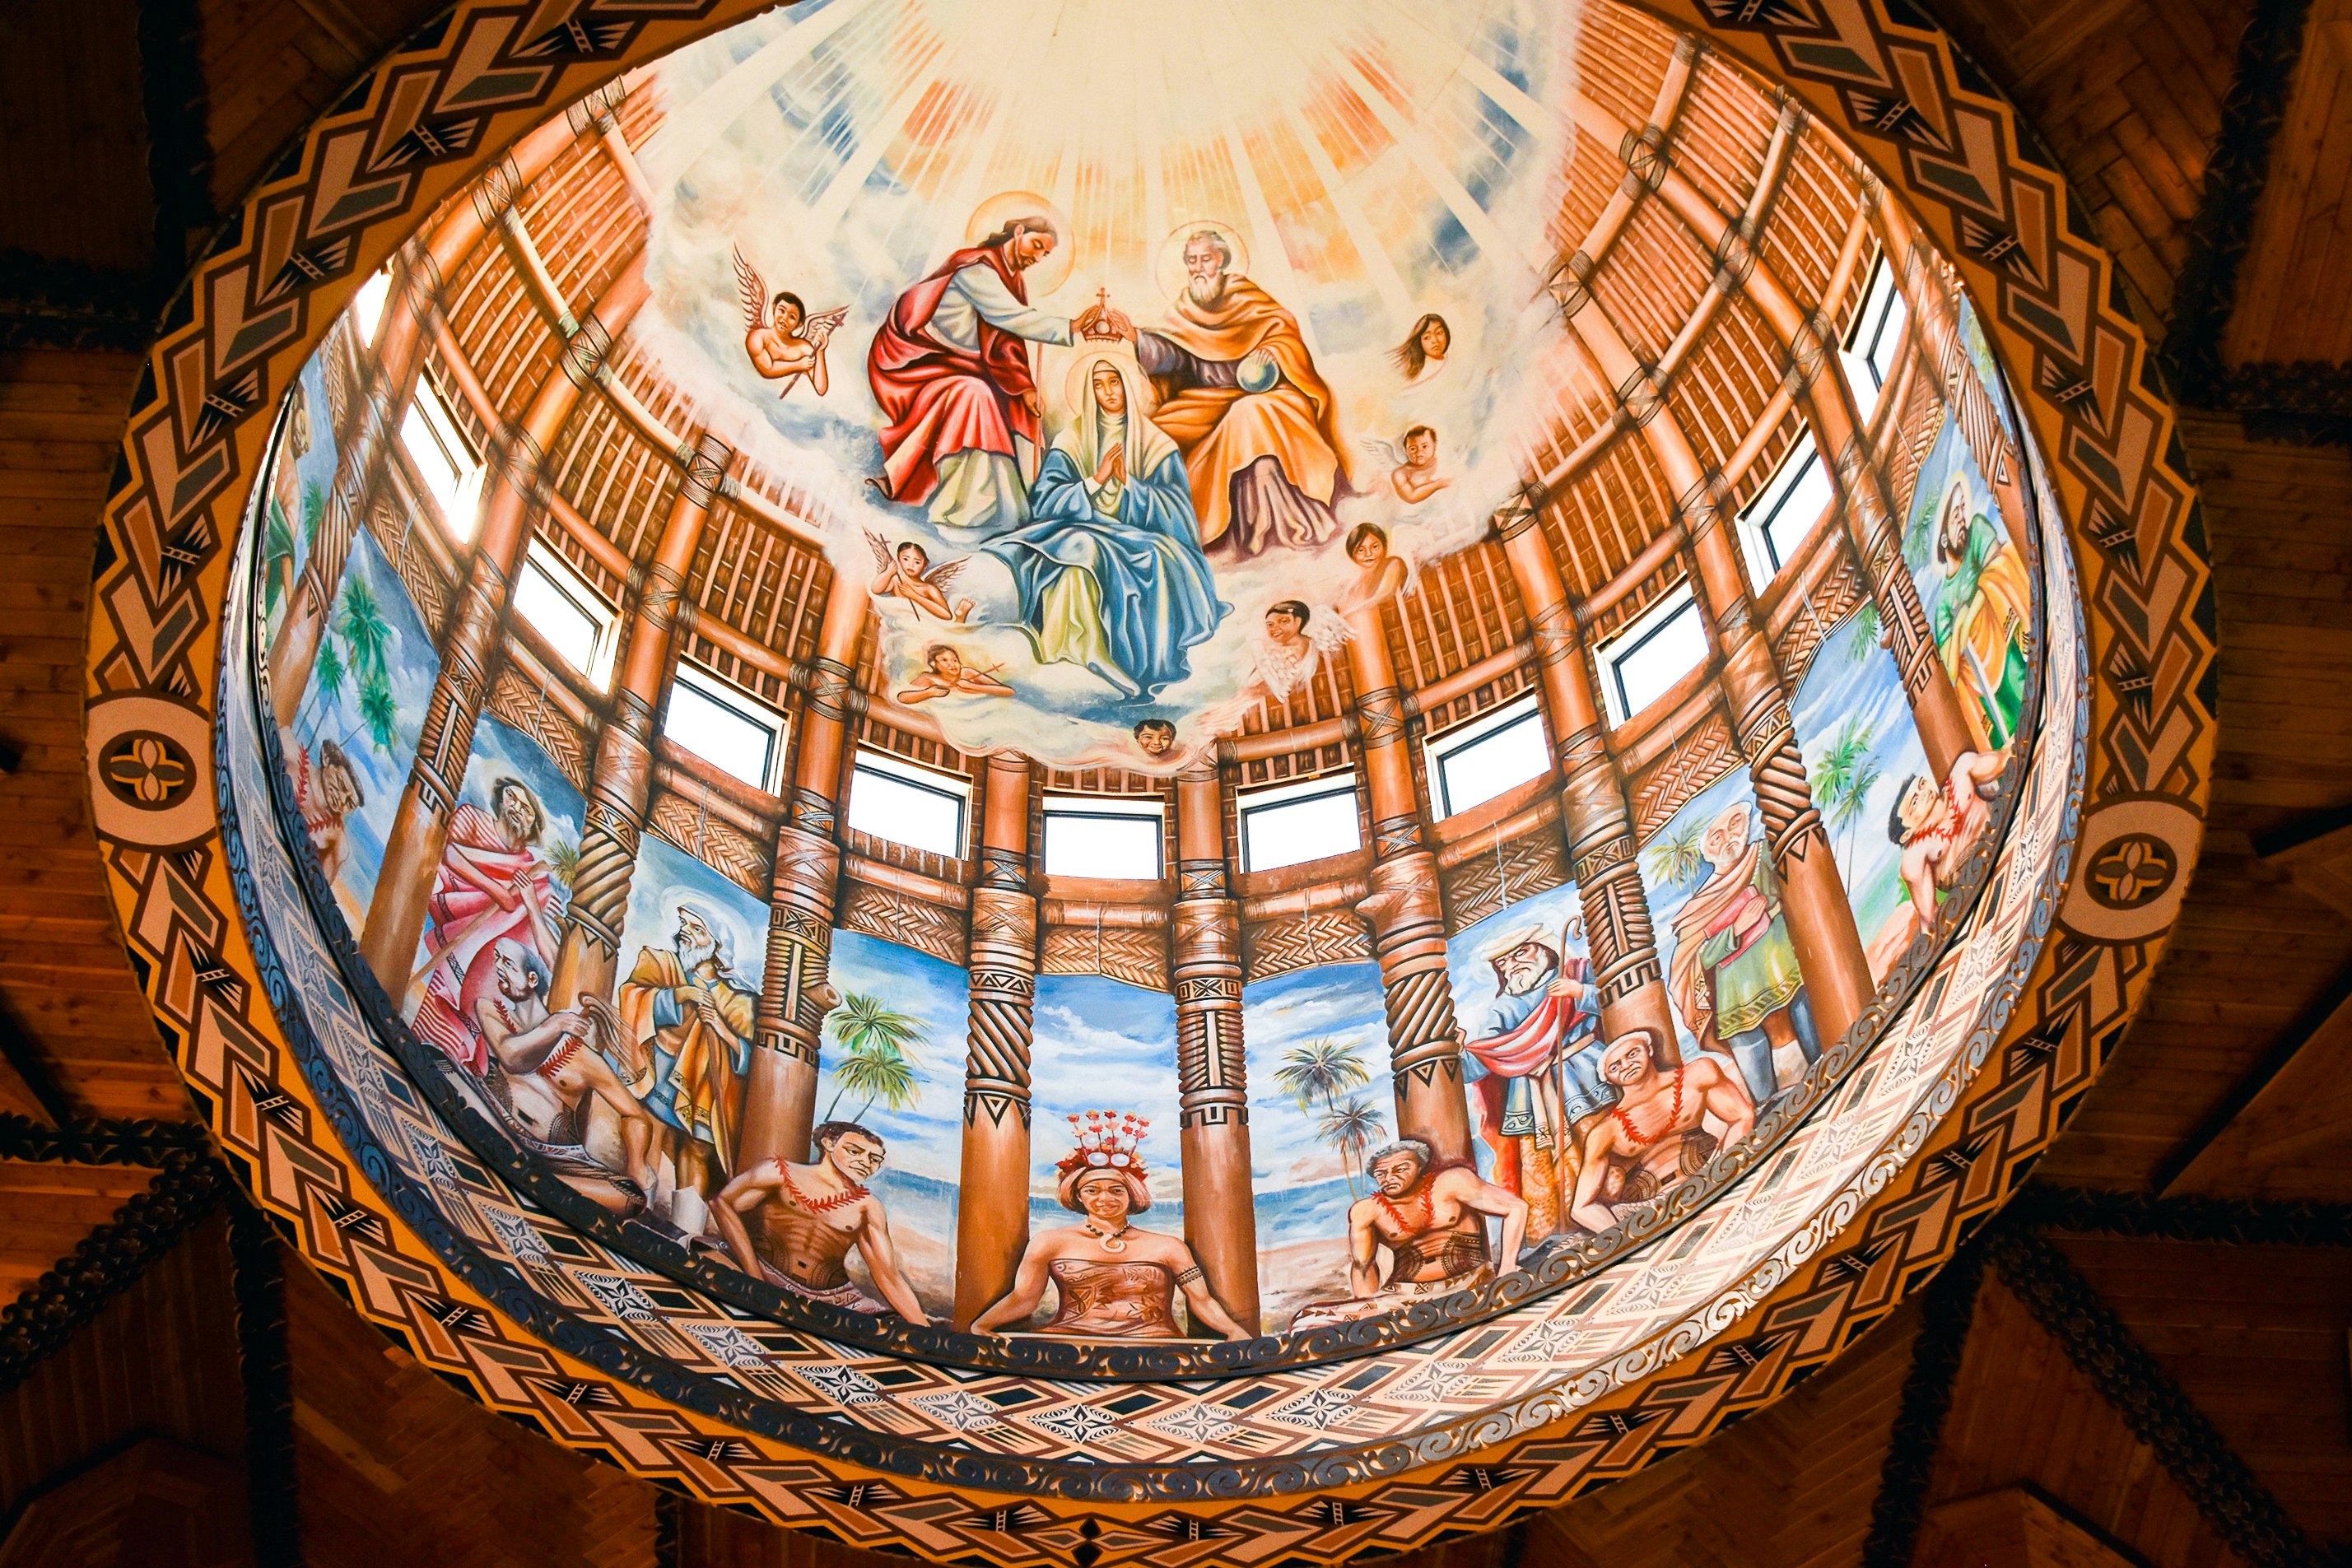 A rounded dome painted with religious Christian imagery with Pasifika elements, such as Samoan patterns on colonnades surrounding apostles sitting at a long dining table. Above them is a triumvirate of Jesus, Mary and Joseph, surrounded by light and cherubin.